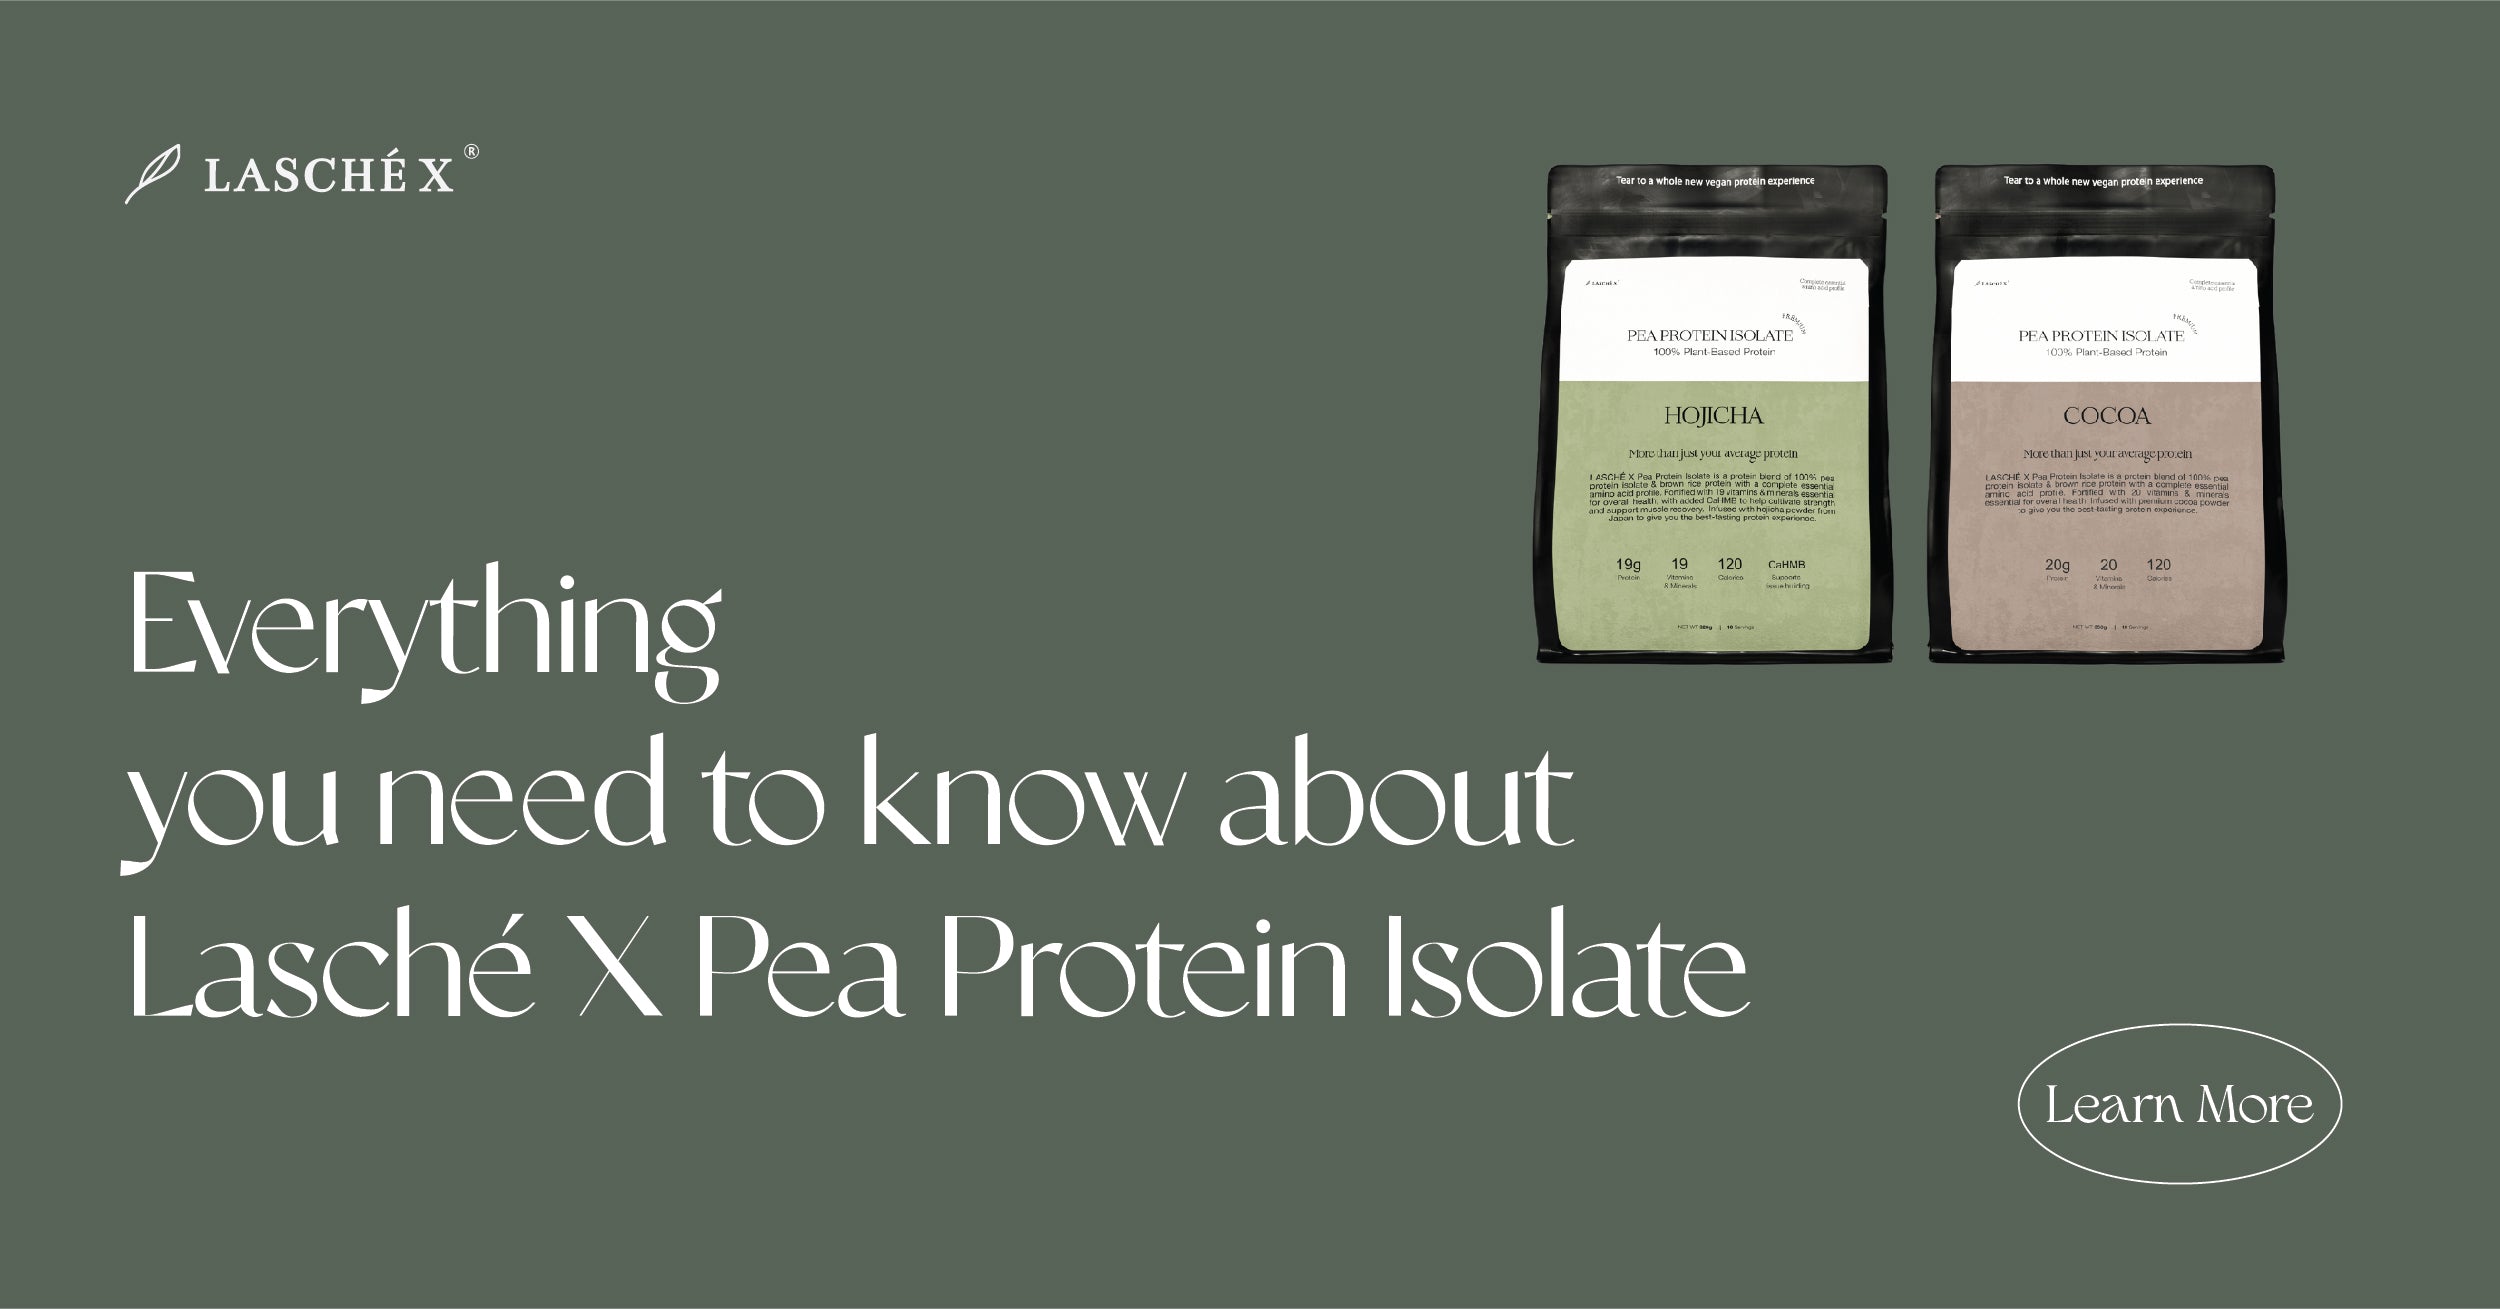 About Lasché X Pea Protein Isolate